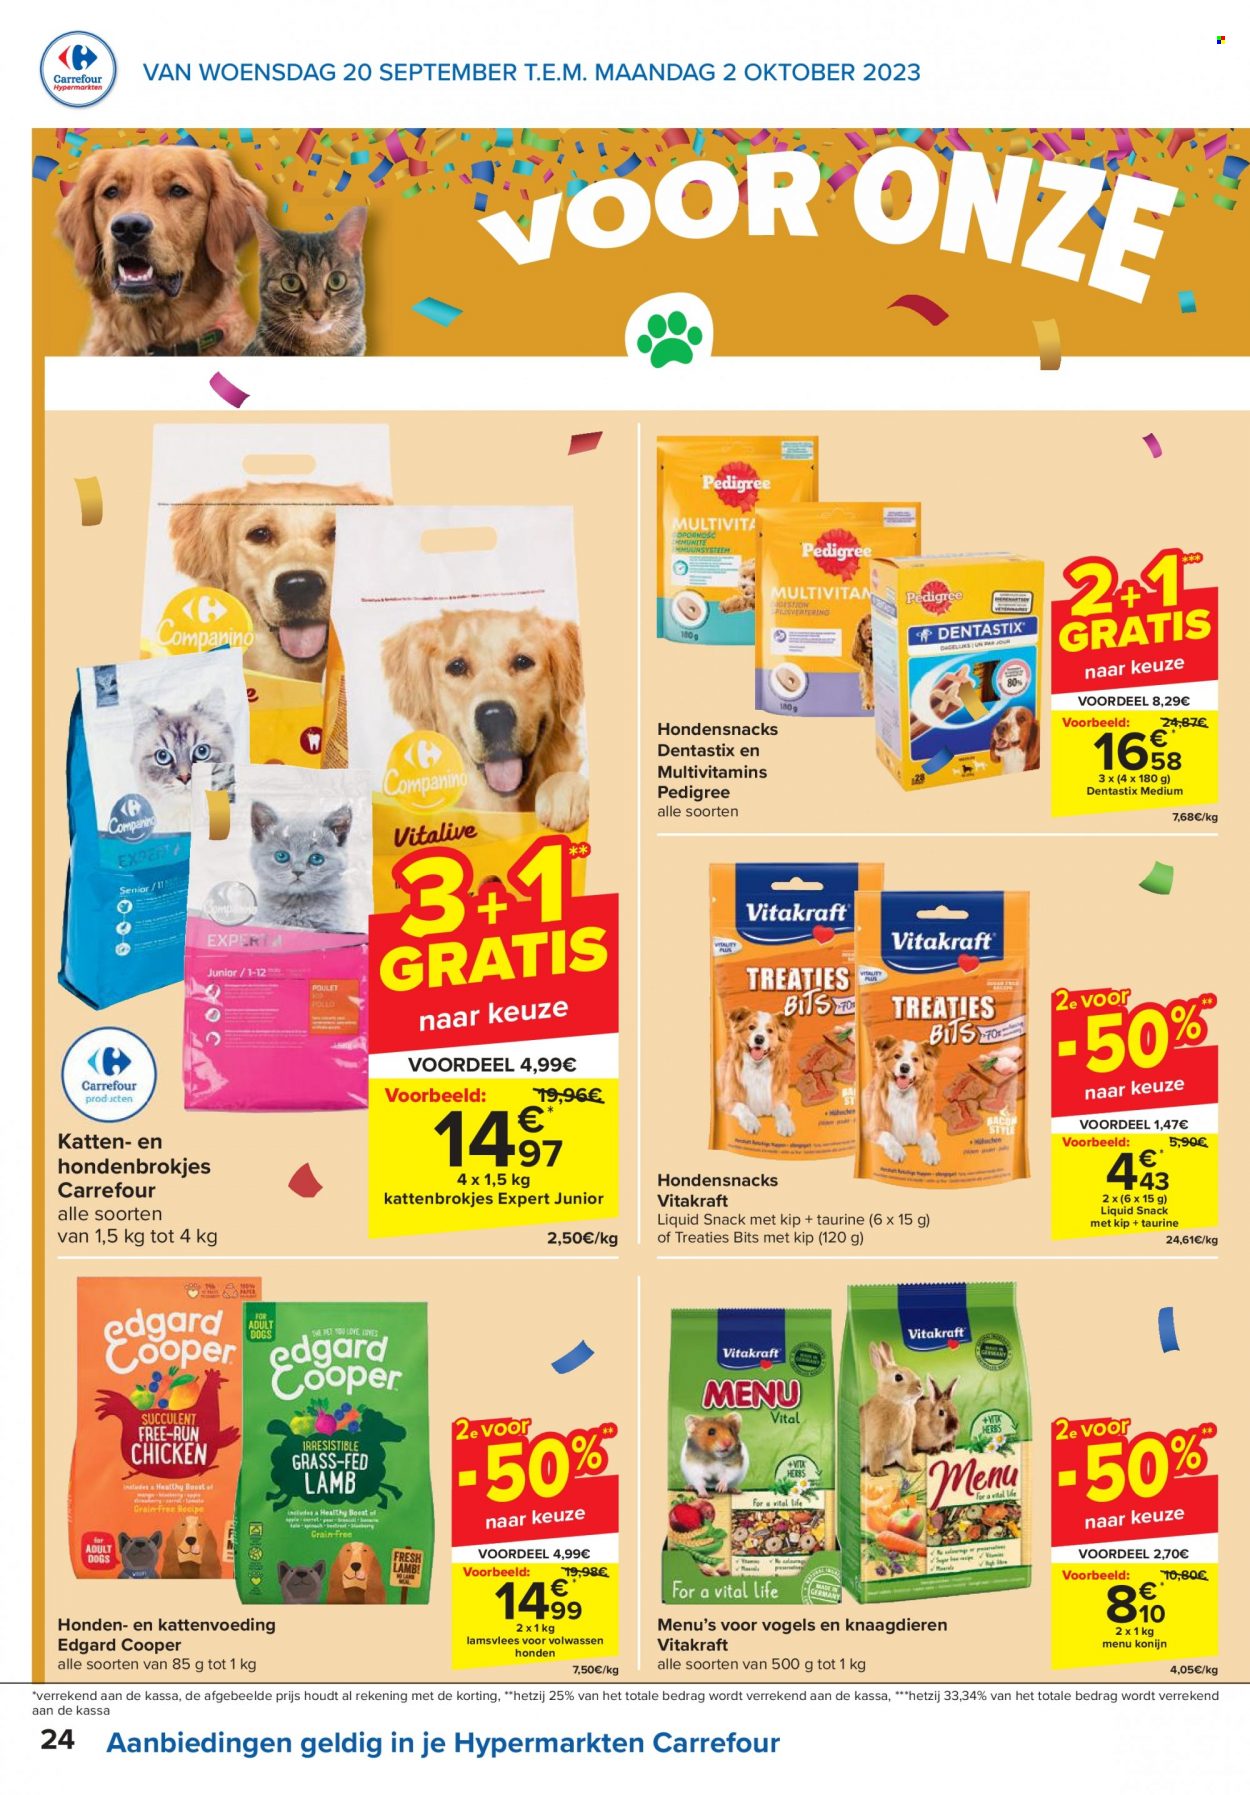 Catalogue Carrefour hypermarkt - 20.9.2023 - 2.10.2023. Page 24.